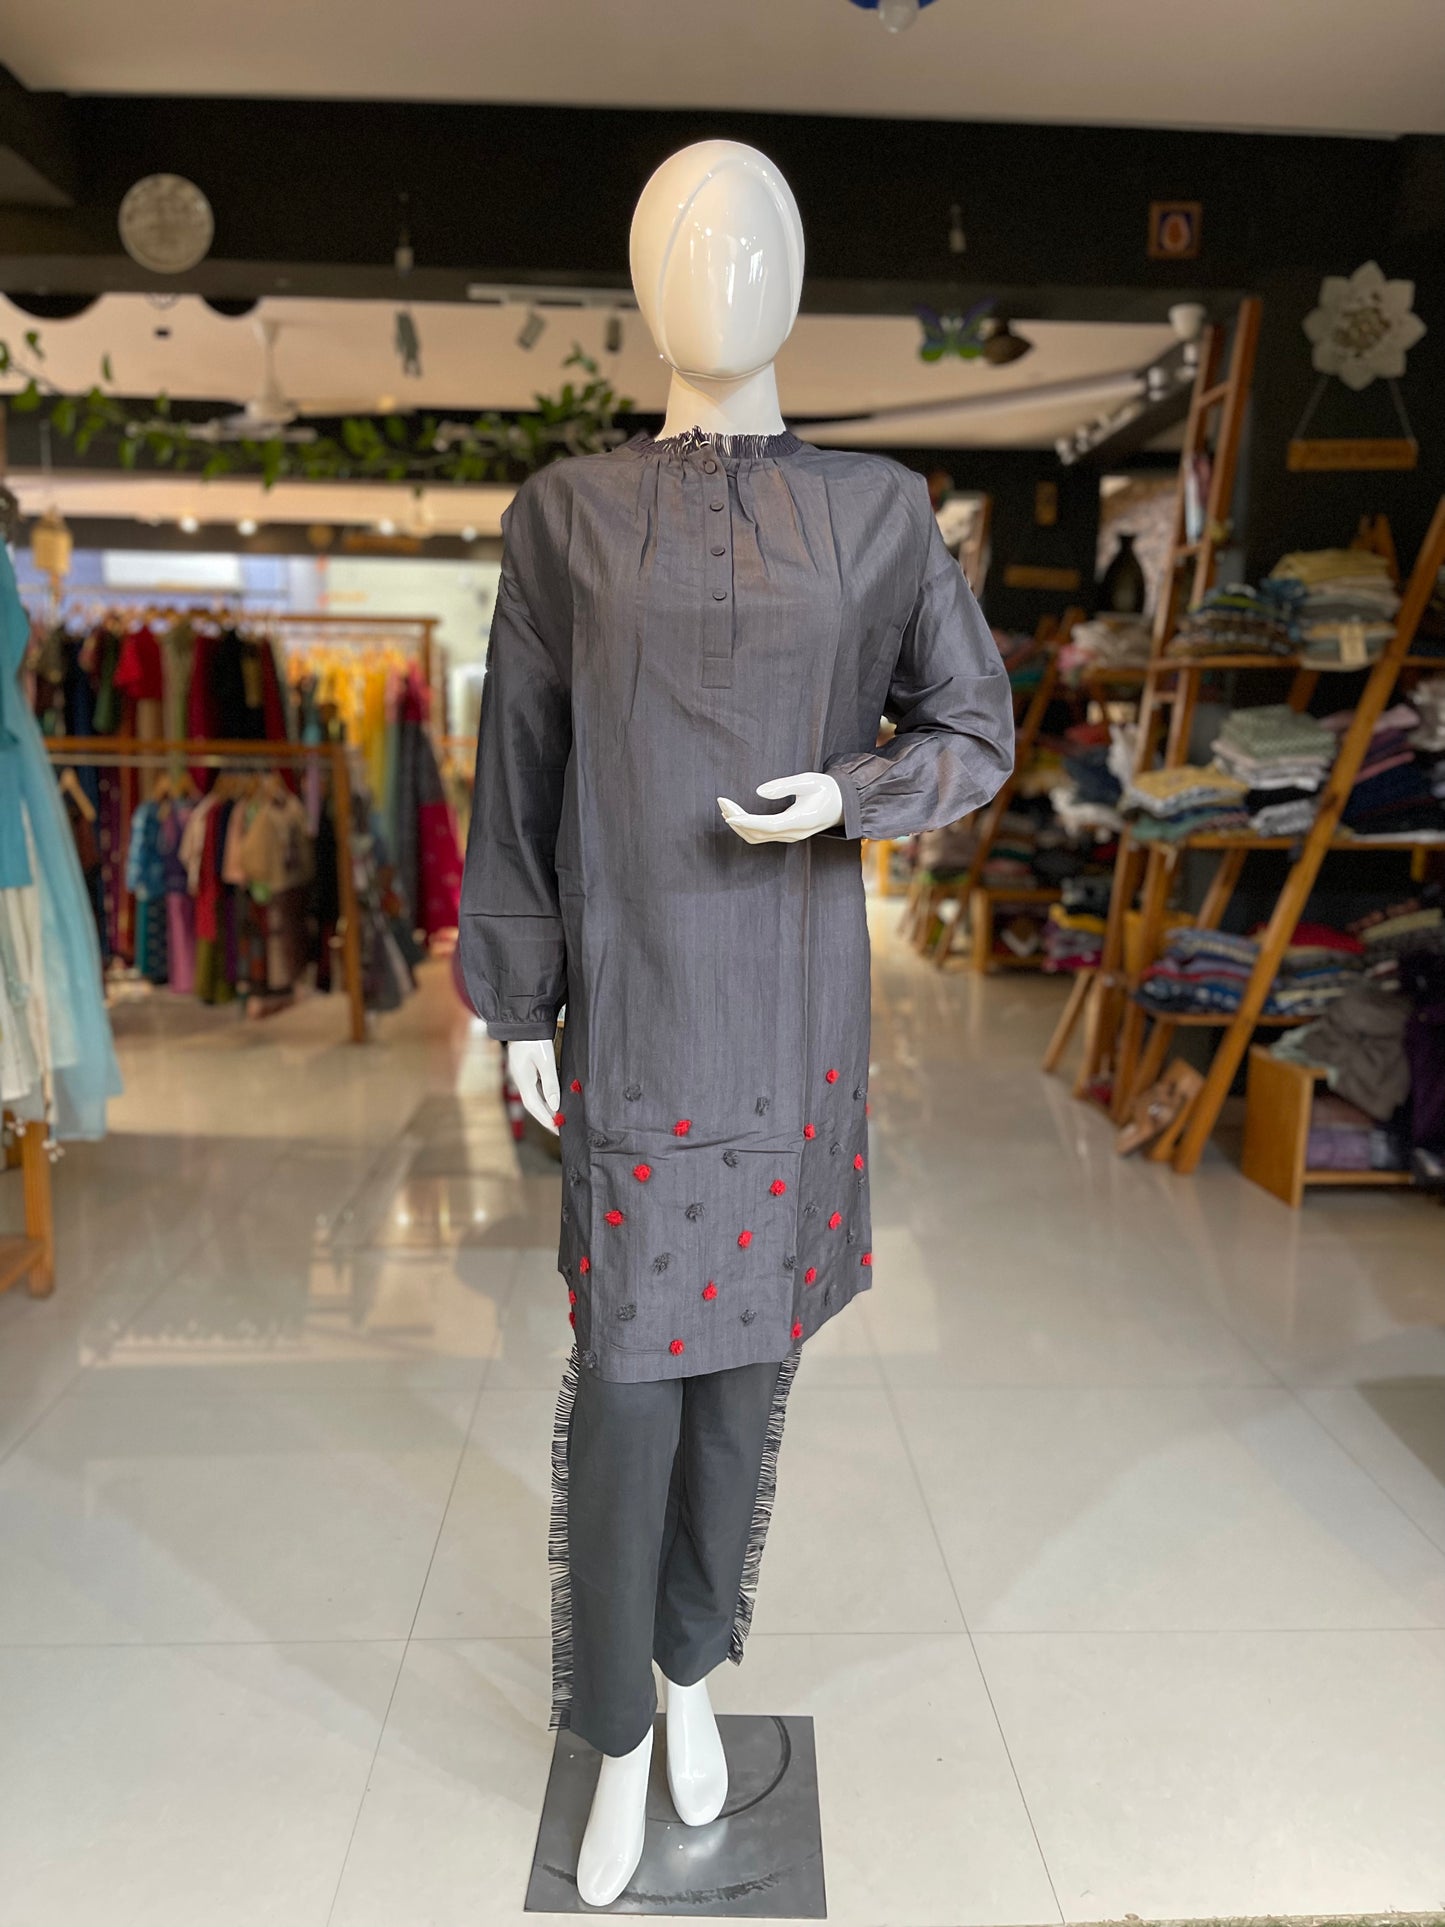 Charcoal dress with red pompom embroidery and pants